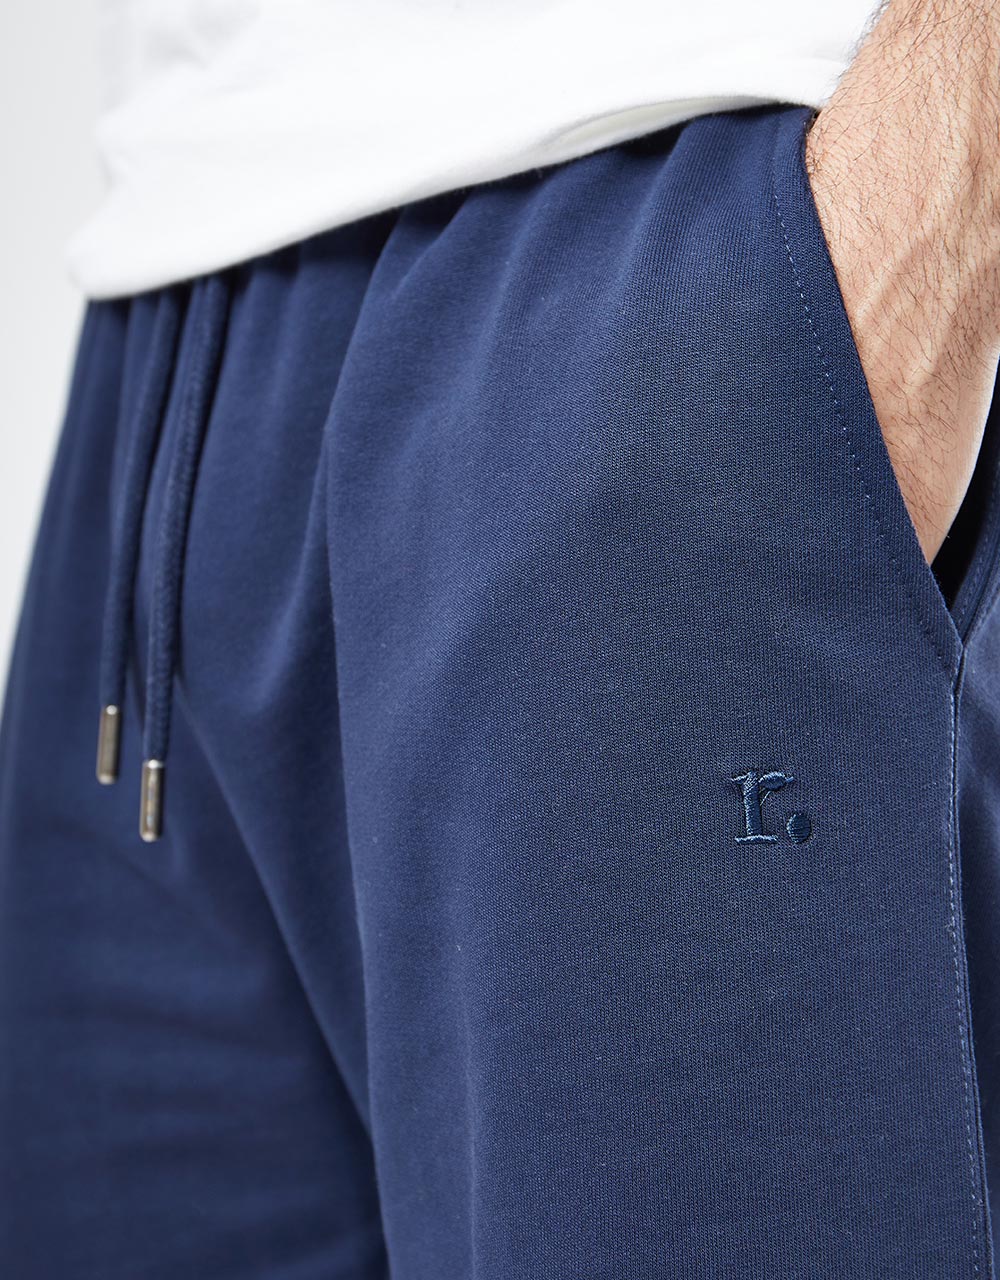 Route One Jersey Pool Shorts - Navy